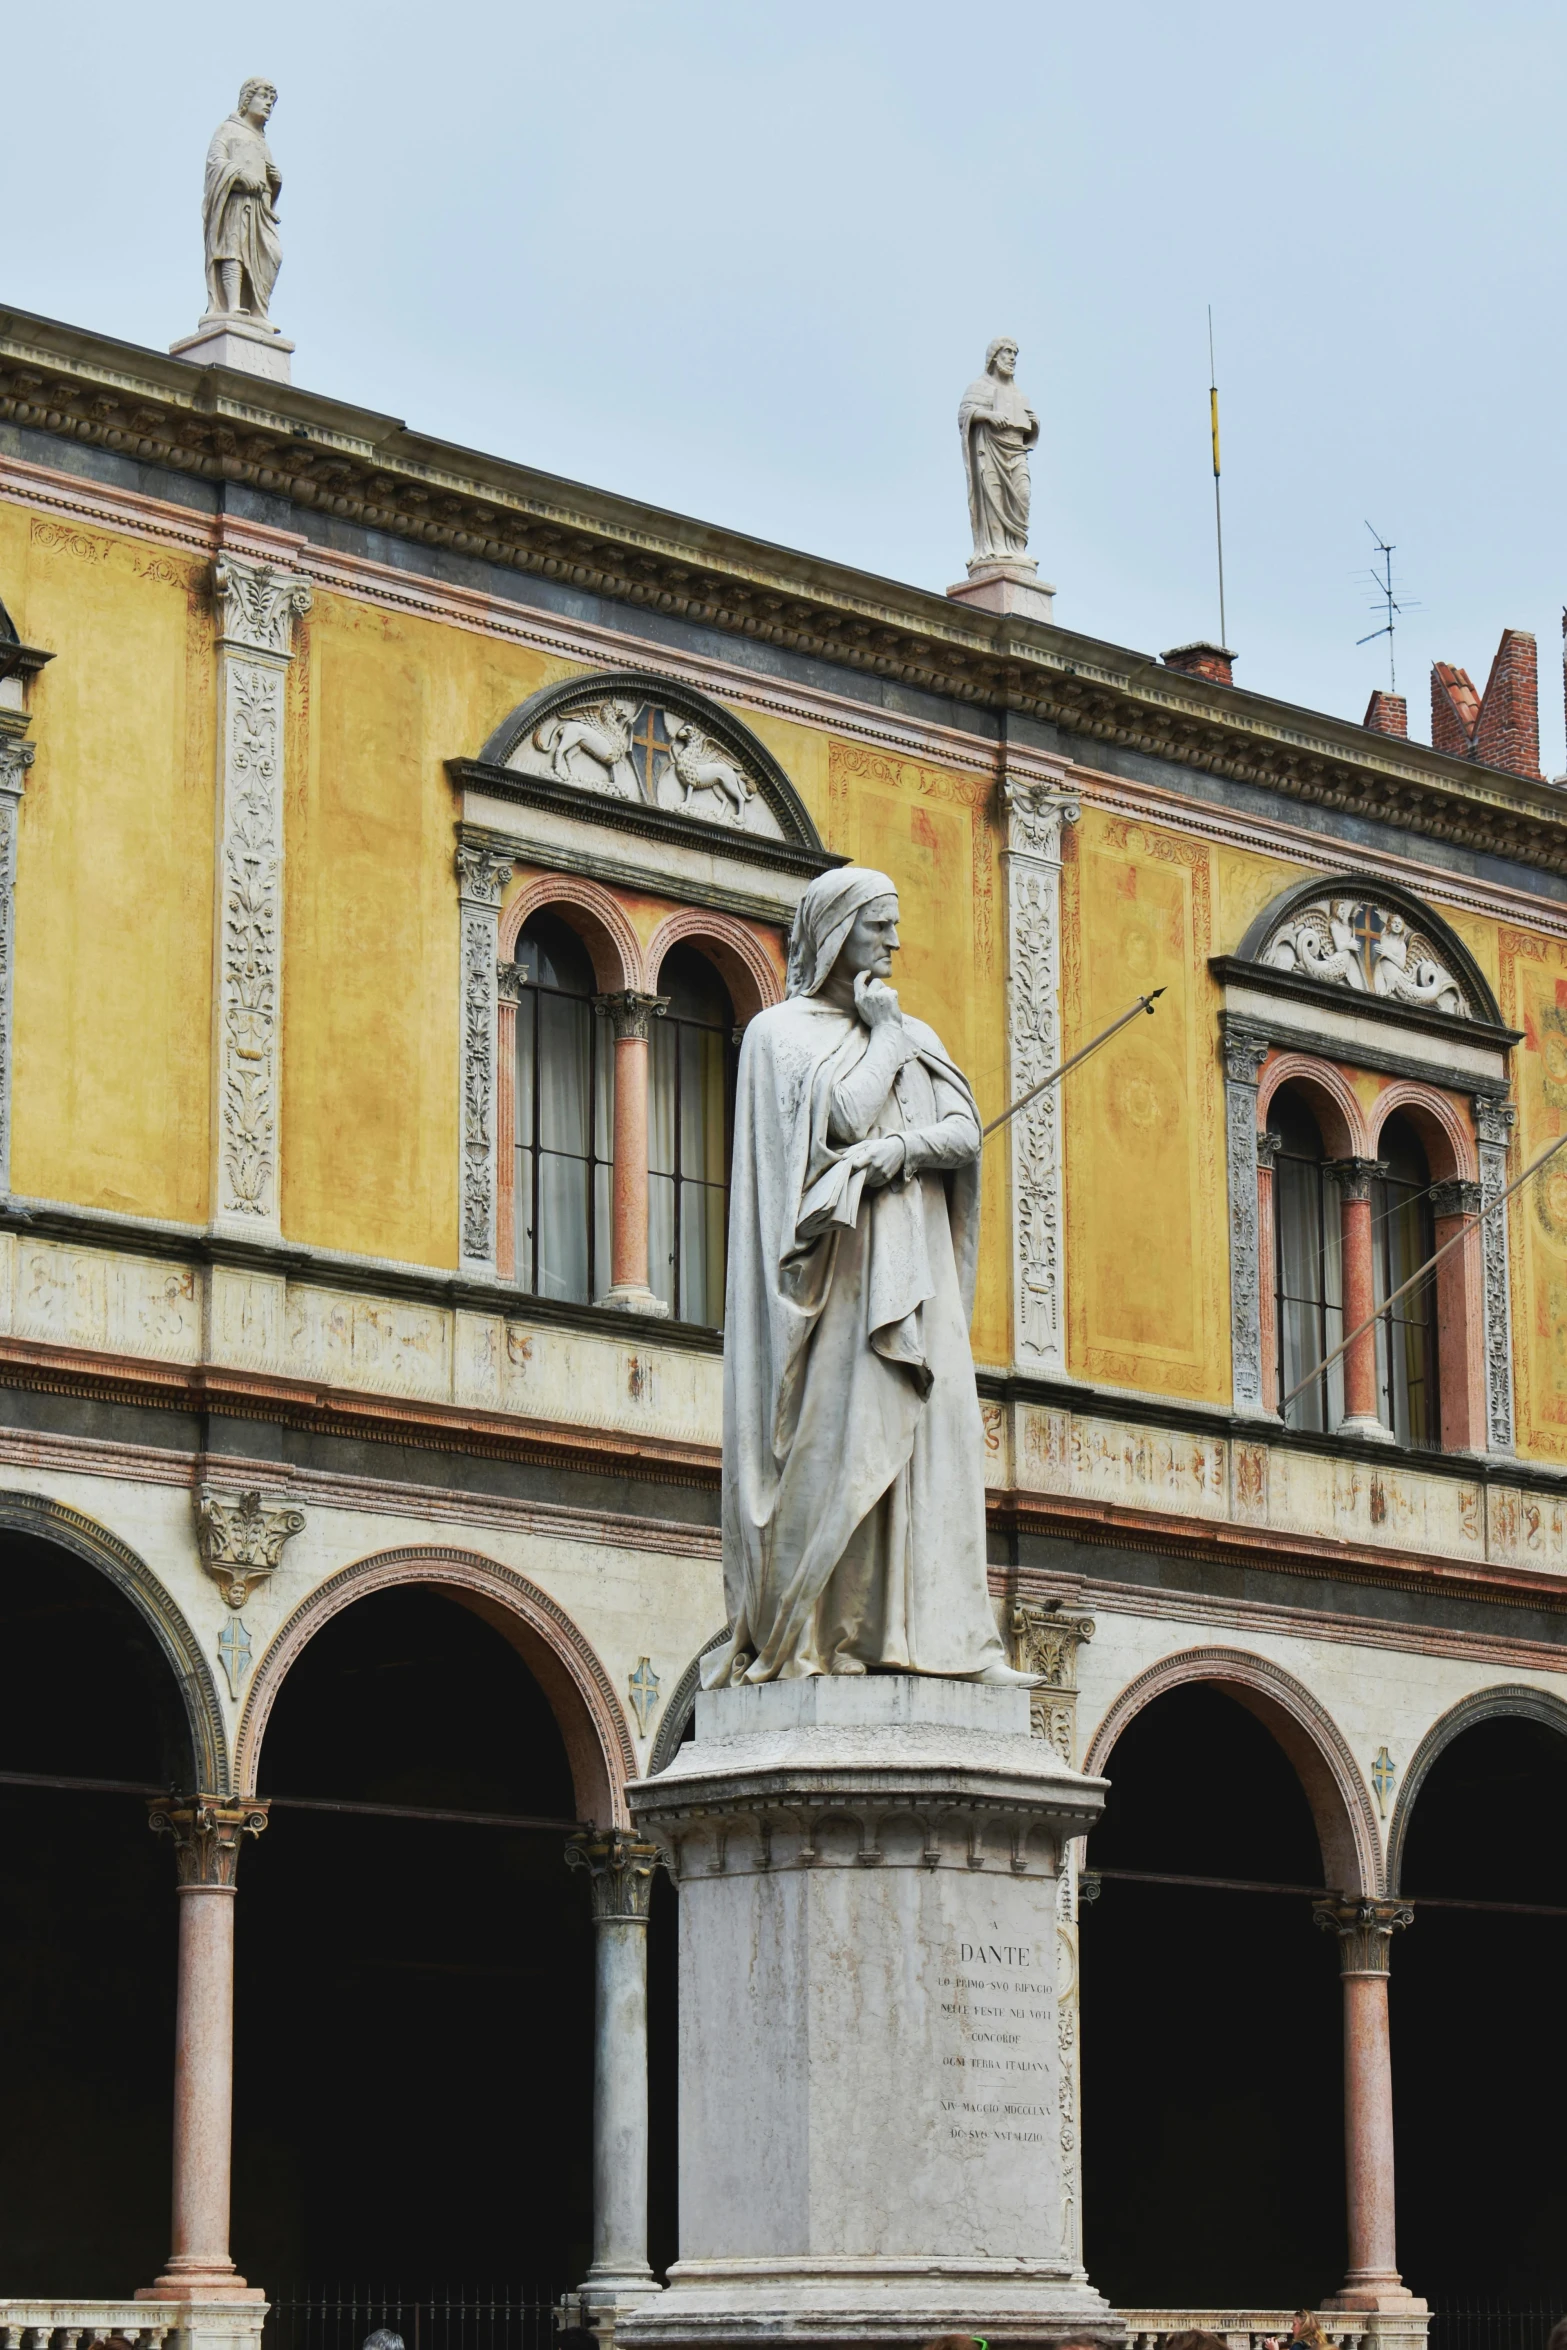 a statue of a man standing in front of a building, a statue, inspired by Giovanni Bernardino Mazzolini, wearing a flowing cloak, market square, holding a sword on her shoulder, with yellow cloths